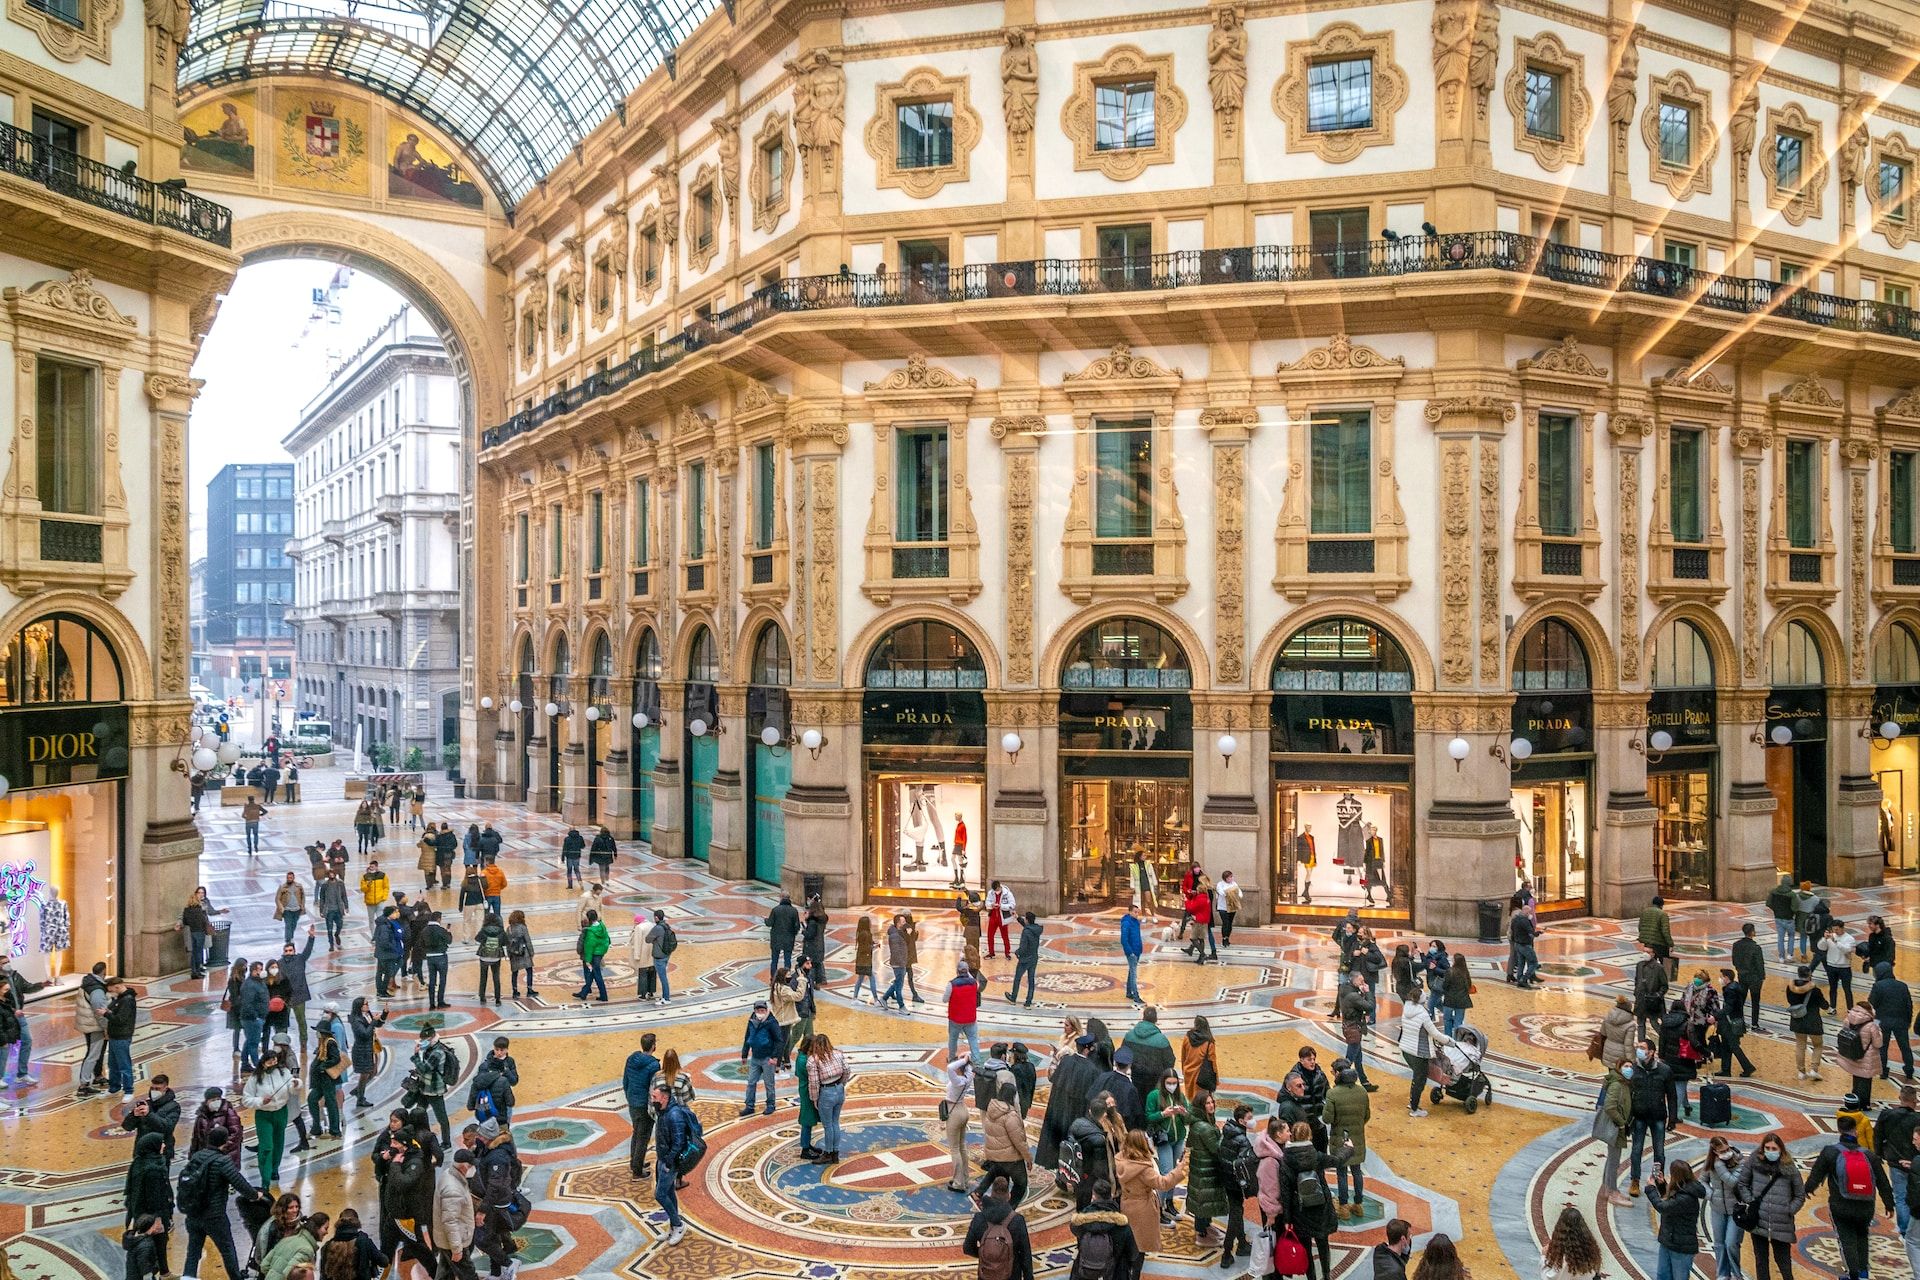 Afternoon shoppers at the Galleria Vittorio Emanuele II in Milan, Italy